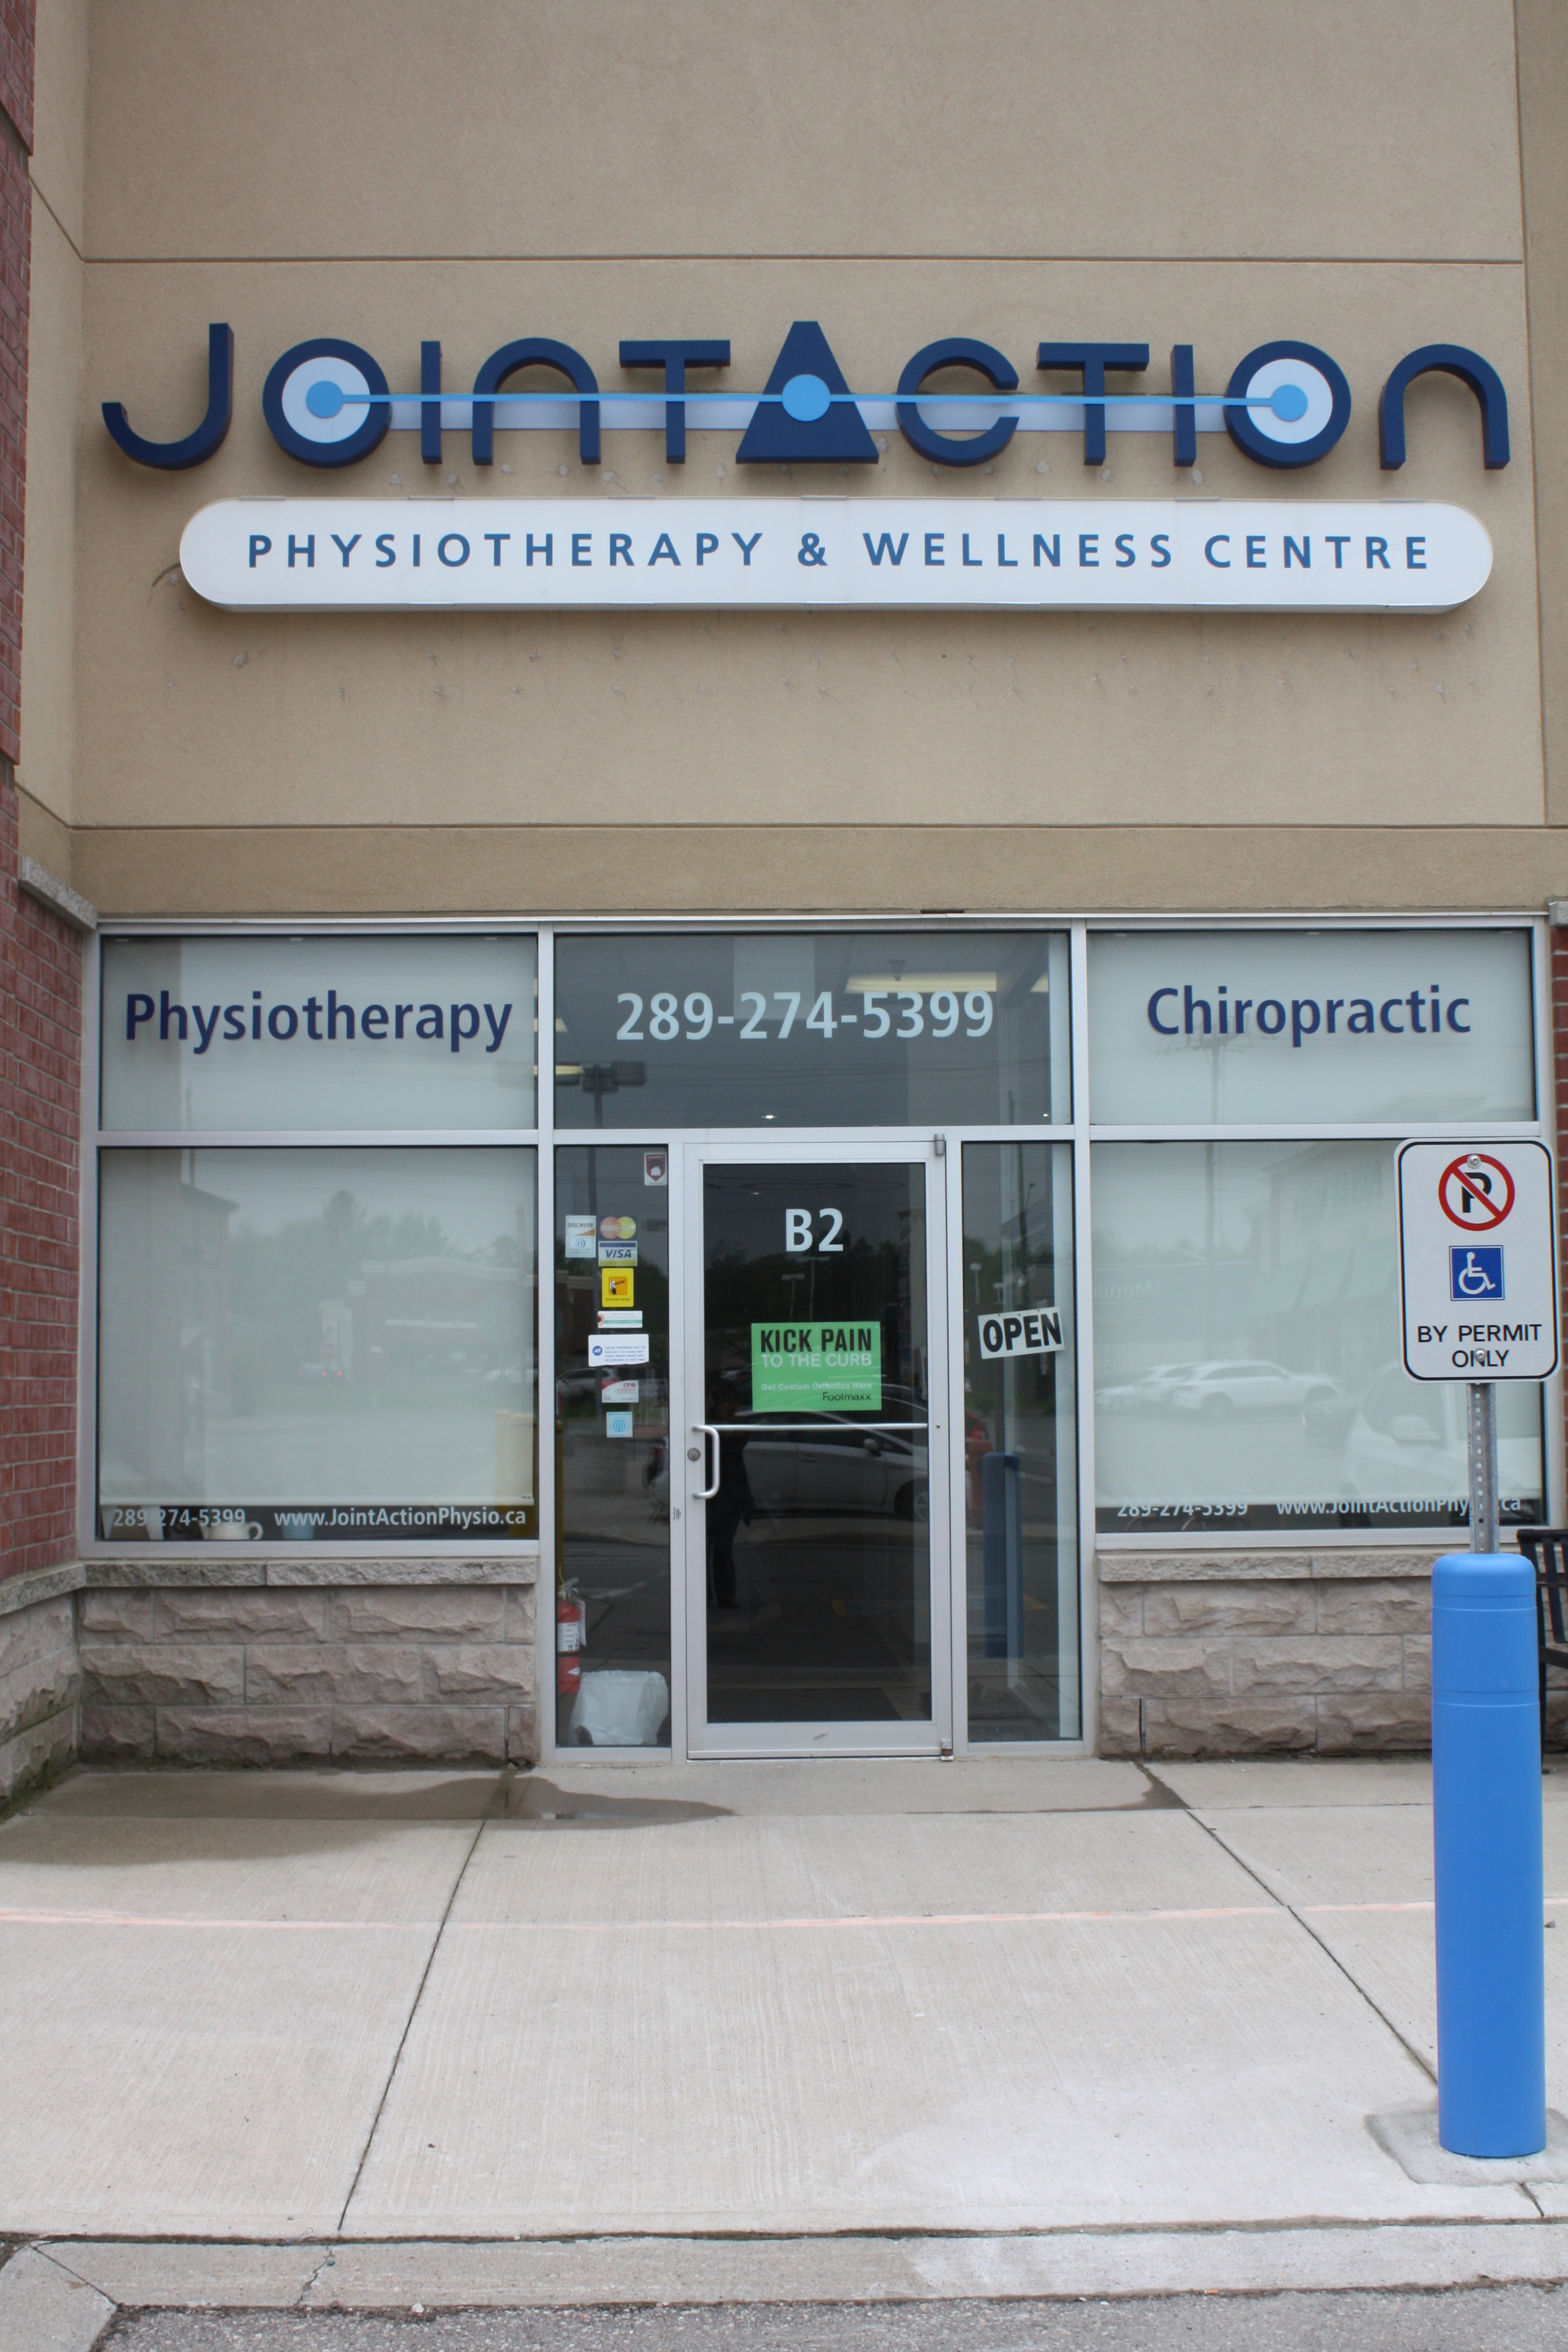 Durham Pelvic Health Physiotherapy | 670 Taunton Rd E, Whitby, ON L1R 0J9 | +1 289-274-5399